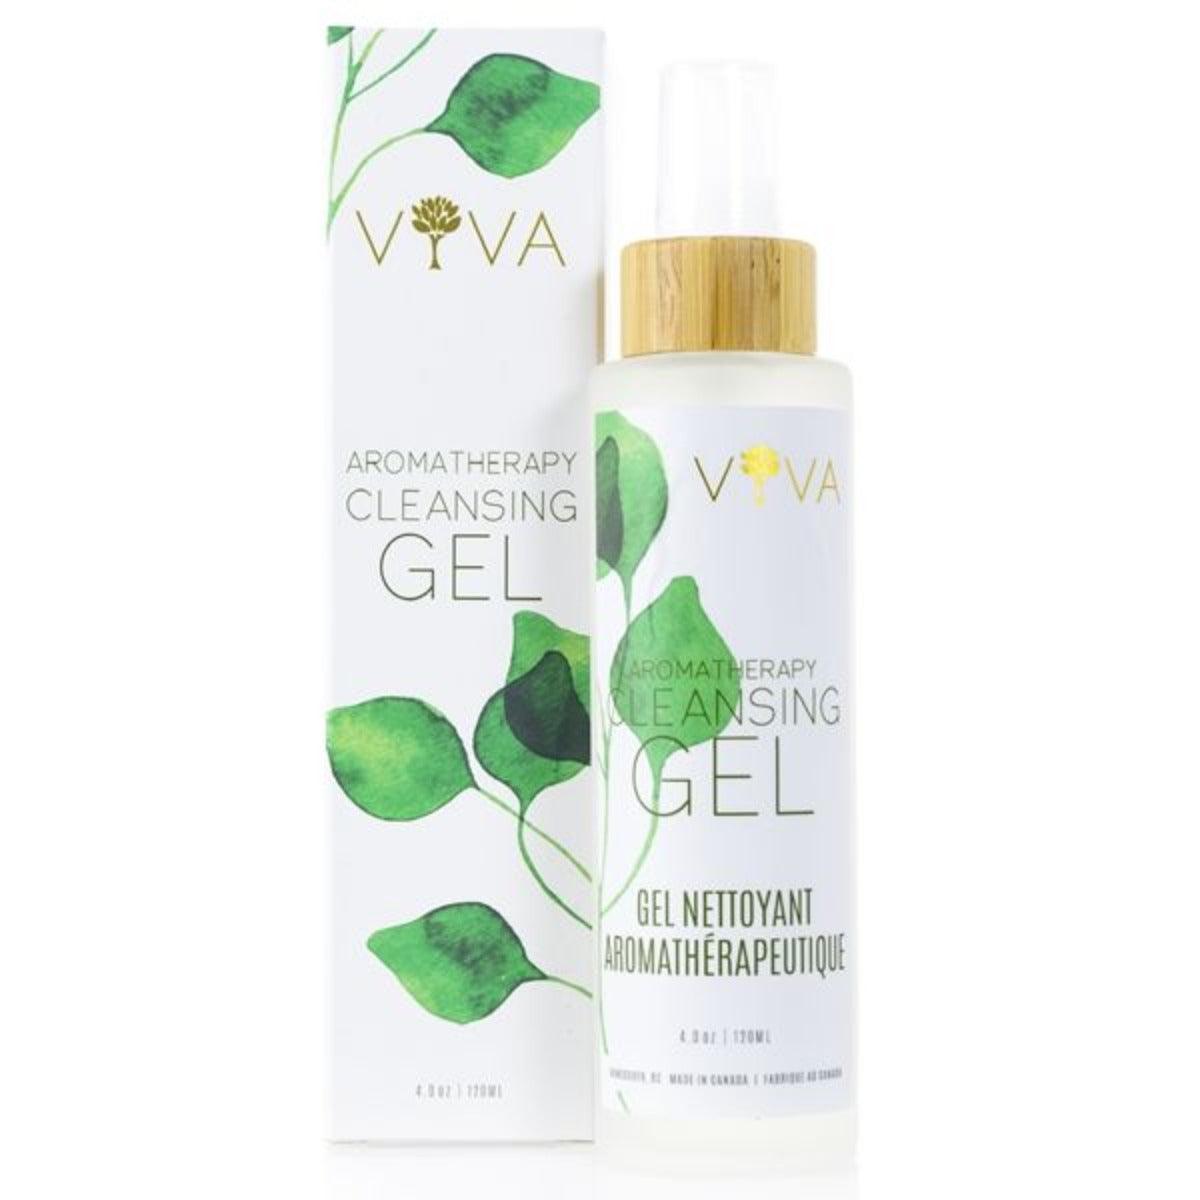 Viva Organics Aromatherapy Cleansing Gel (120 mL) Face Cleansers at Village Vitamin Store